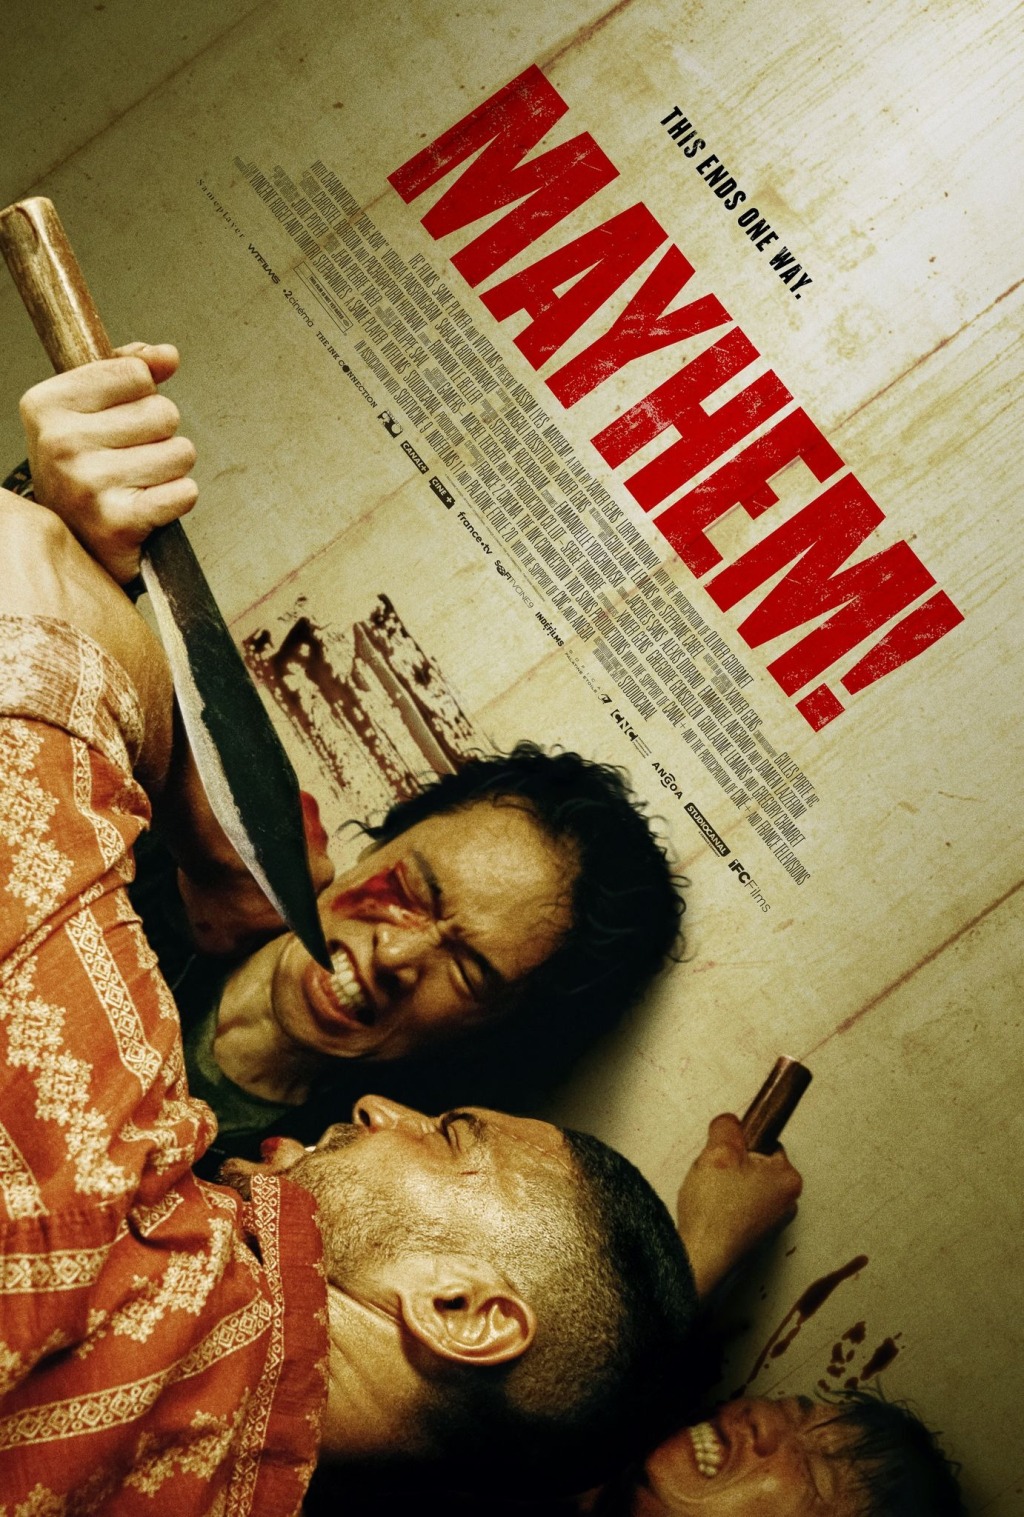 Mayhem! Review — A gore-filled action film